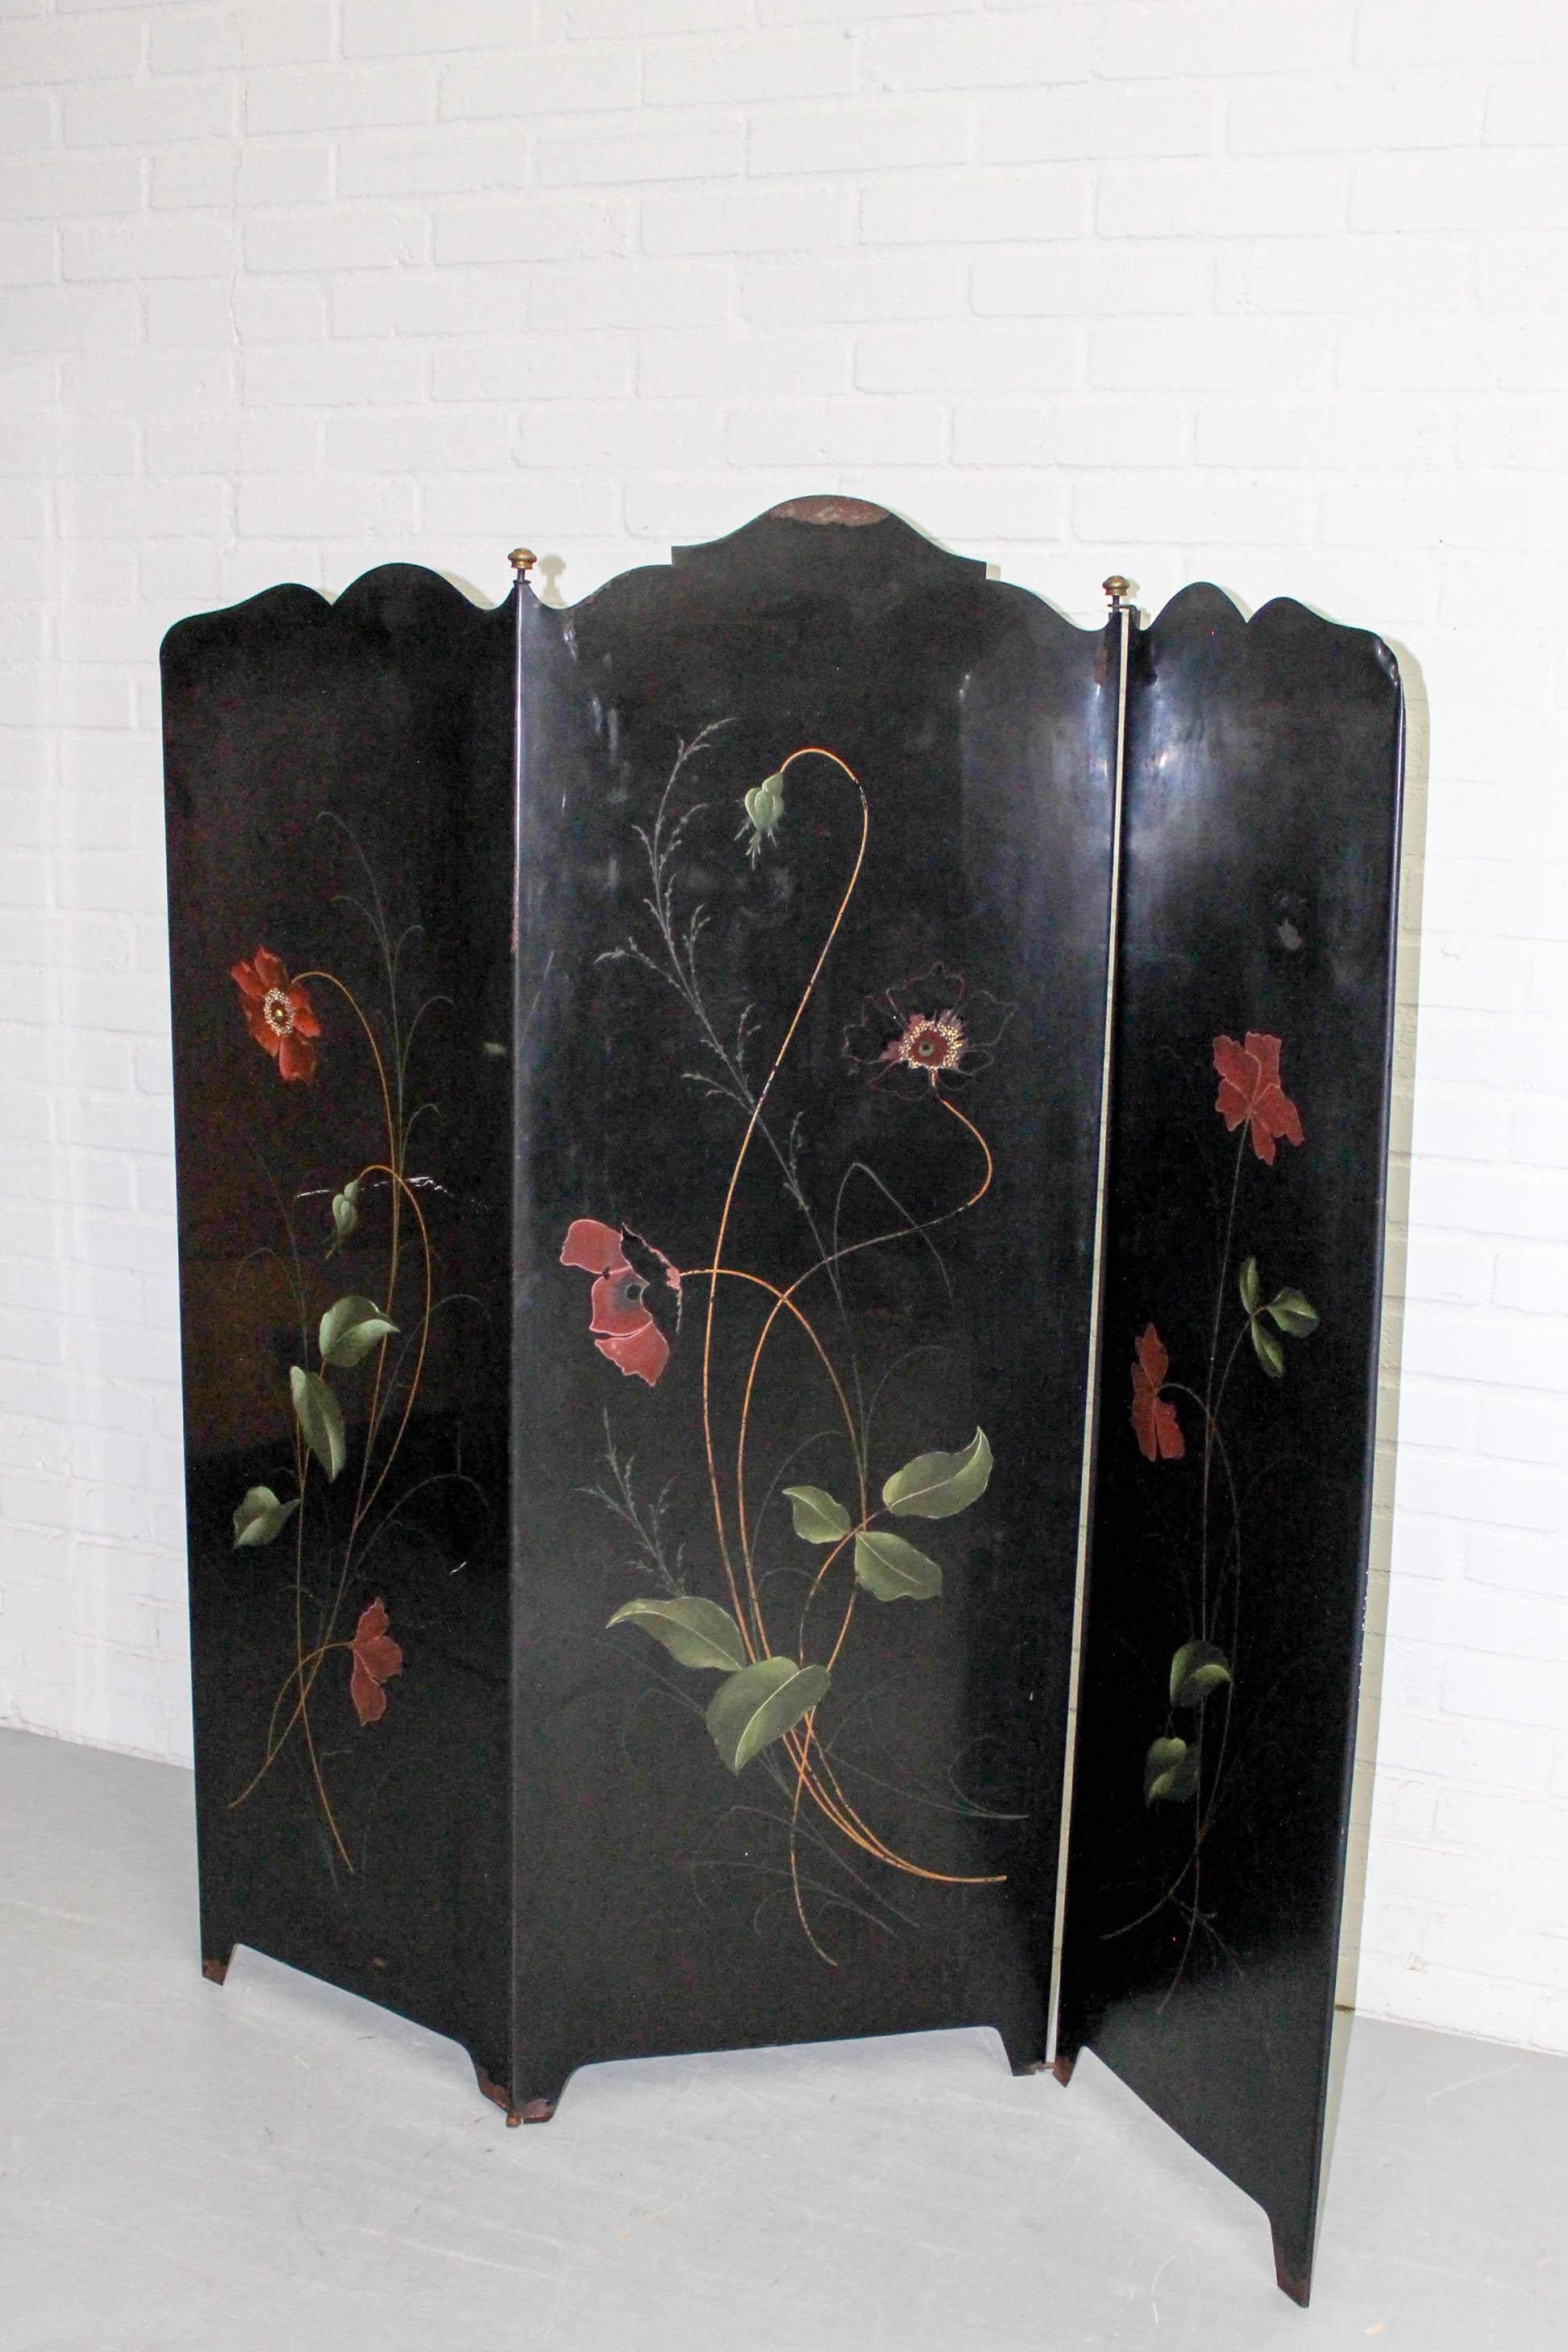 Fabulous Art Deco three-panel folding screen or room divider comprised of black metal with painted flowers and brass knobs. Lovely vintage condition, with some damage but no restorations. Dimensions: 135cm H, 130cm W.